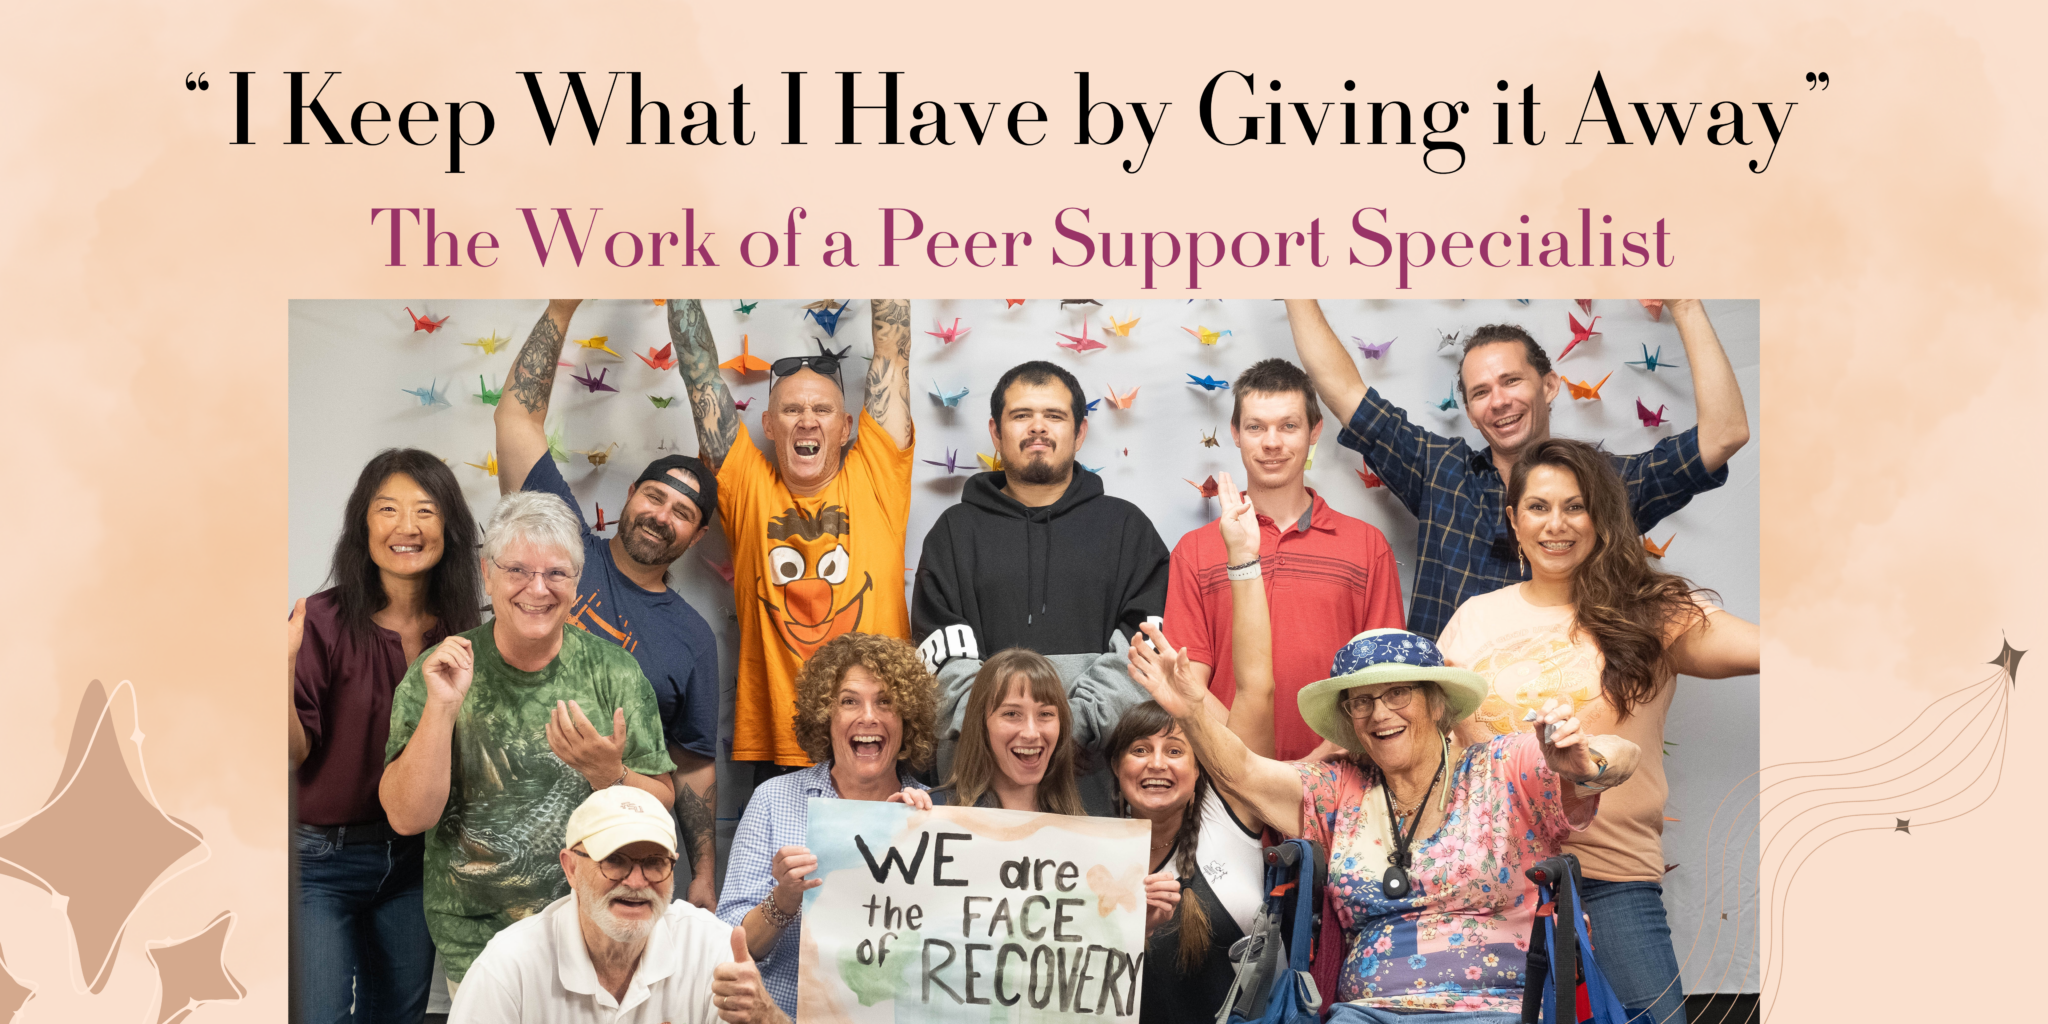 "I Keep What I Have by Giving it Away" The Work of a Peer Support Specialist